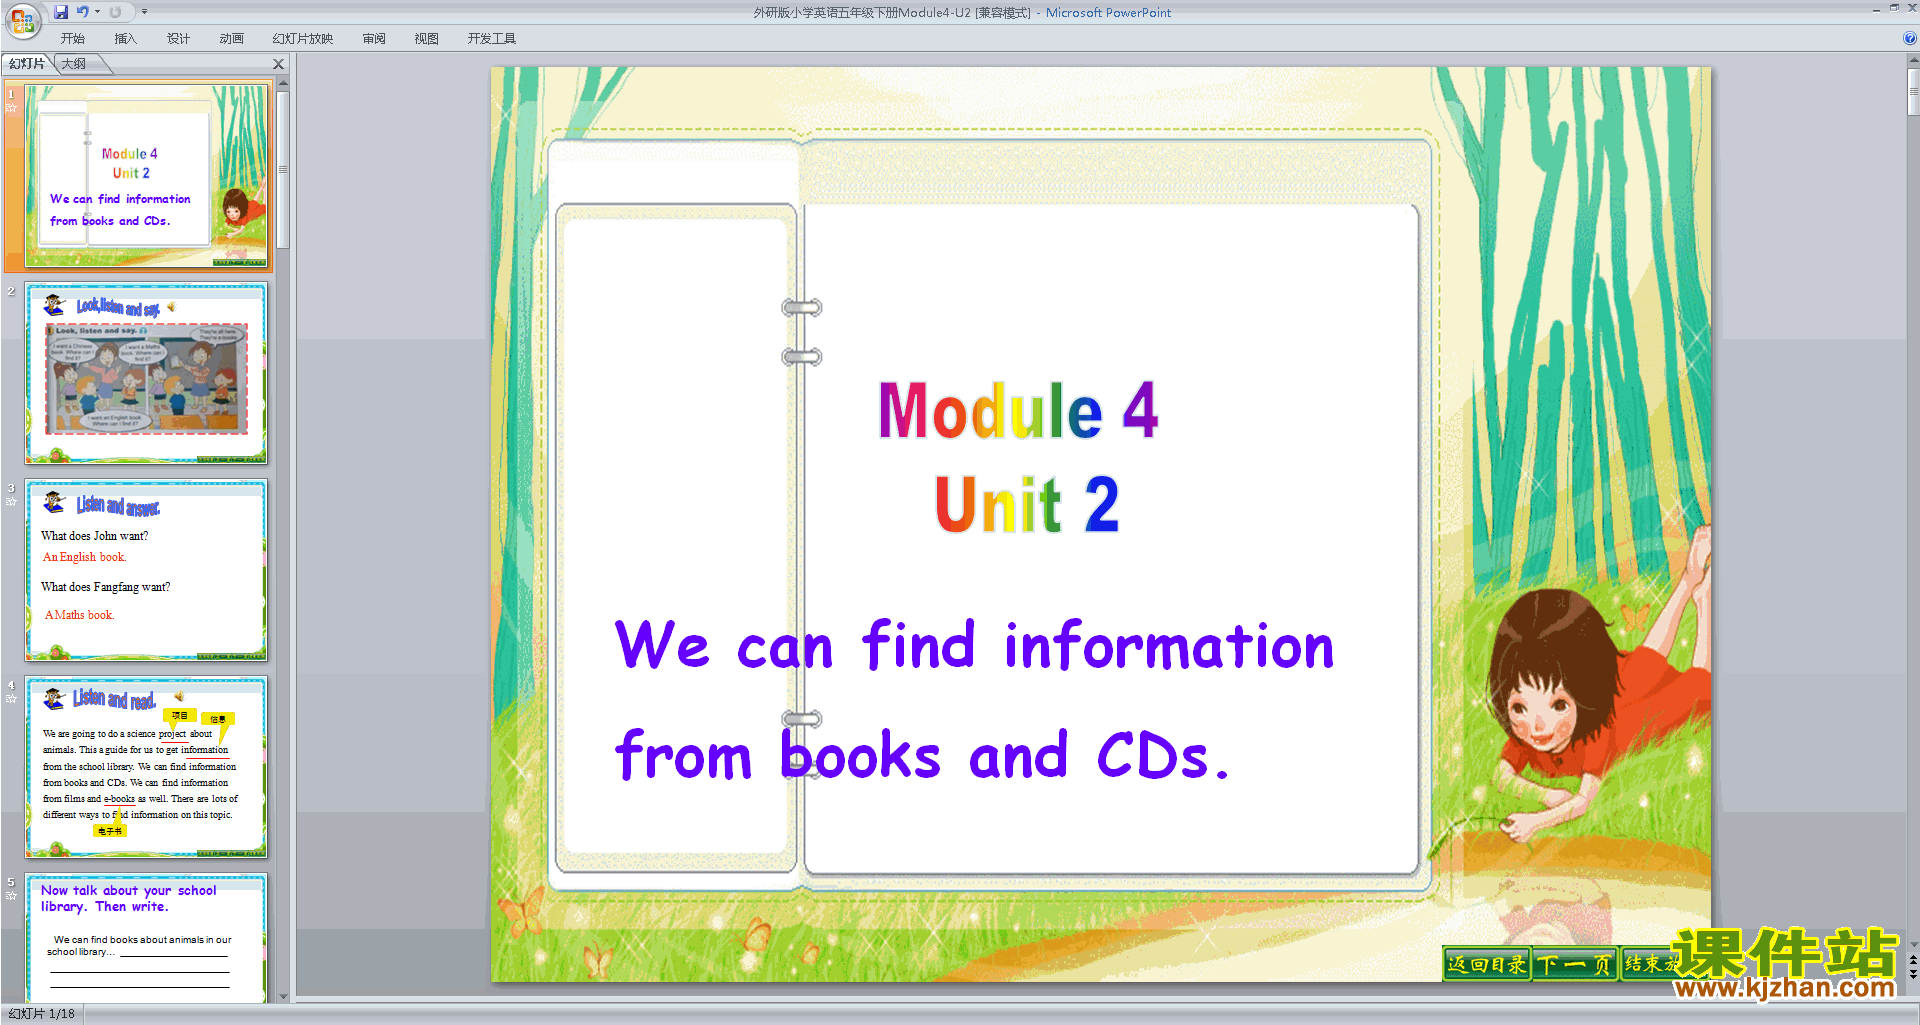 аWe can find information from books and CDspptμ